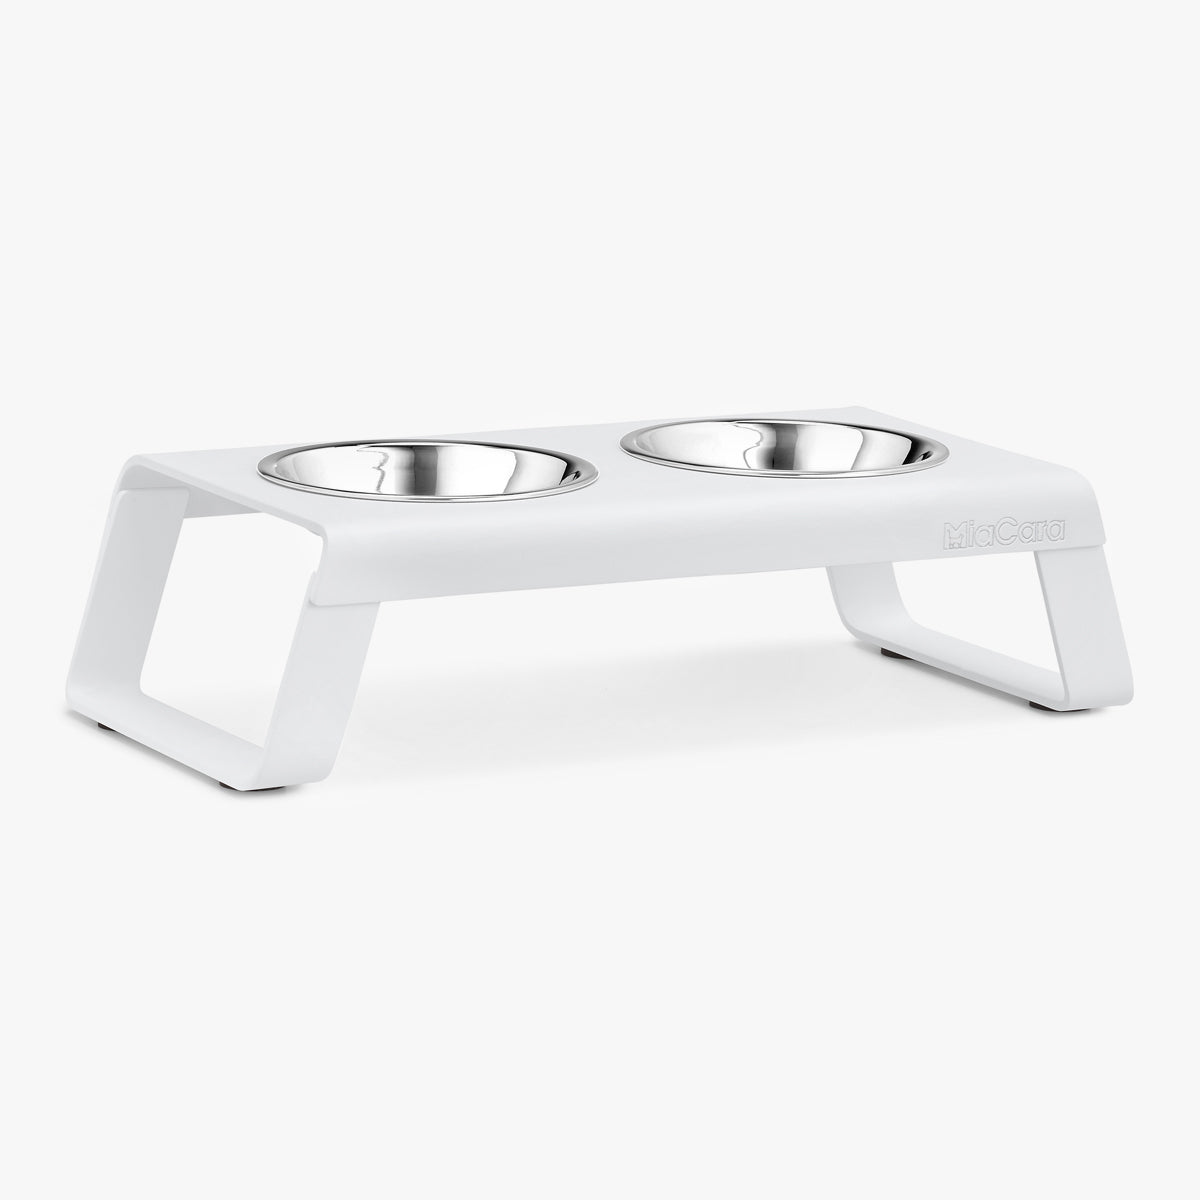 Stainless Steel Cat Bowls For MiaCara Cat Feeder | Buy at Made Moggie Australia.